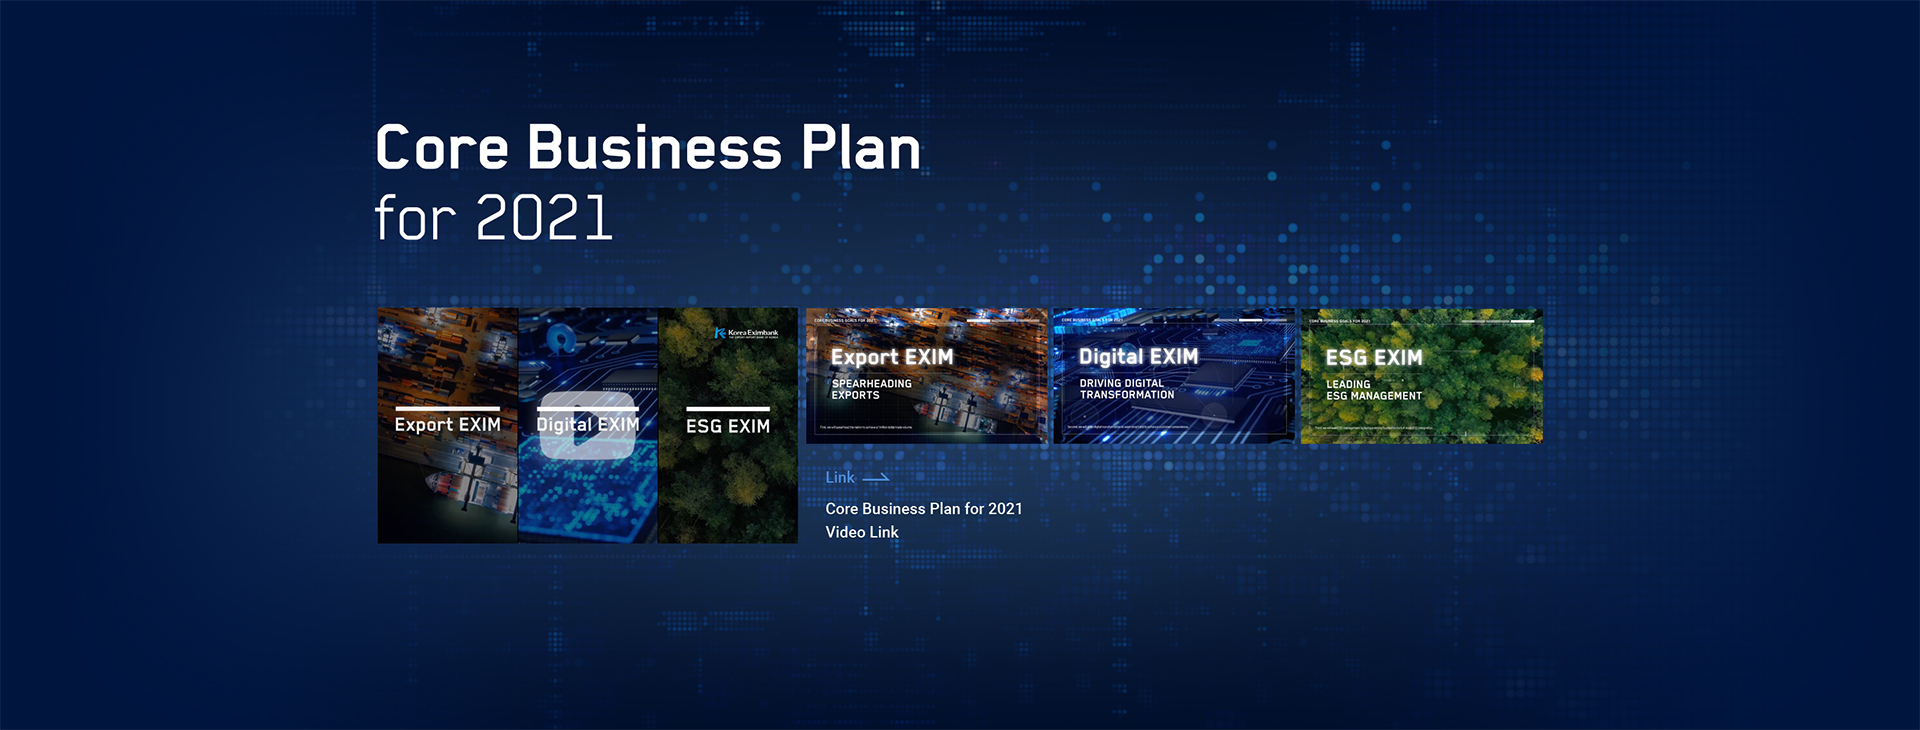 Core Business Plan for 2021